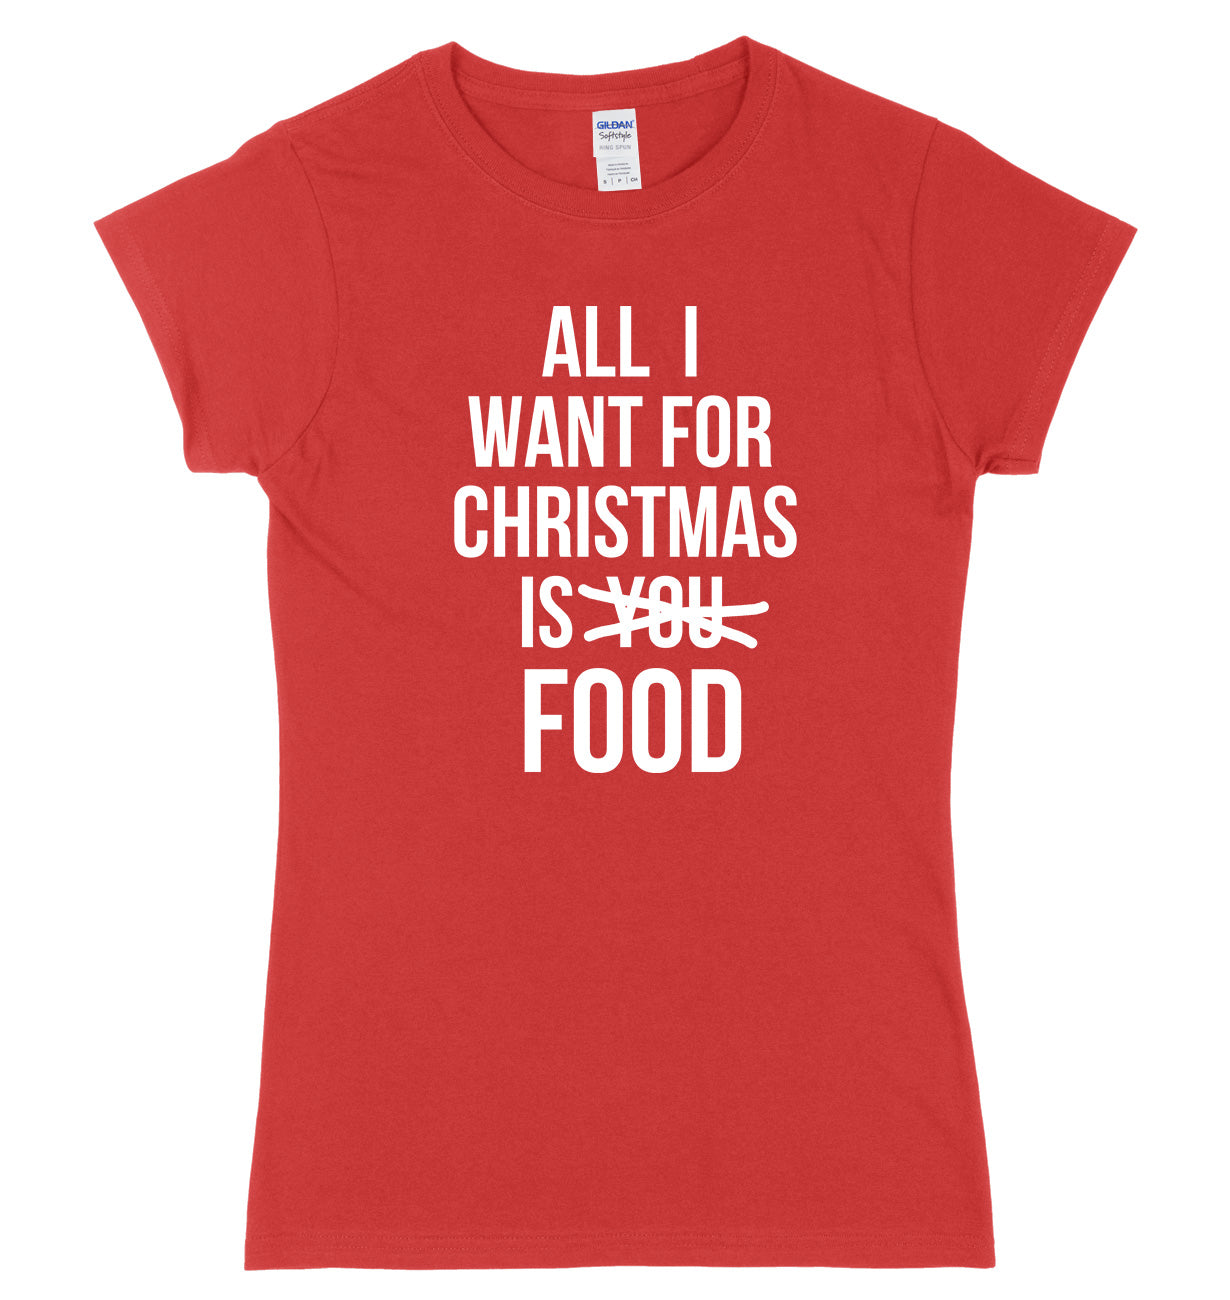 All I Want For Christmas Is Food Womens Ladies Slim Fit Funny Christmas T-Shirt